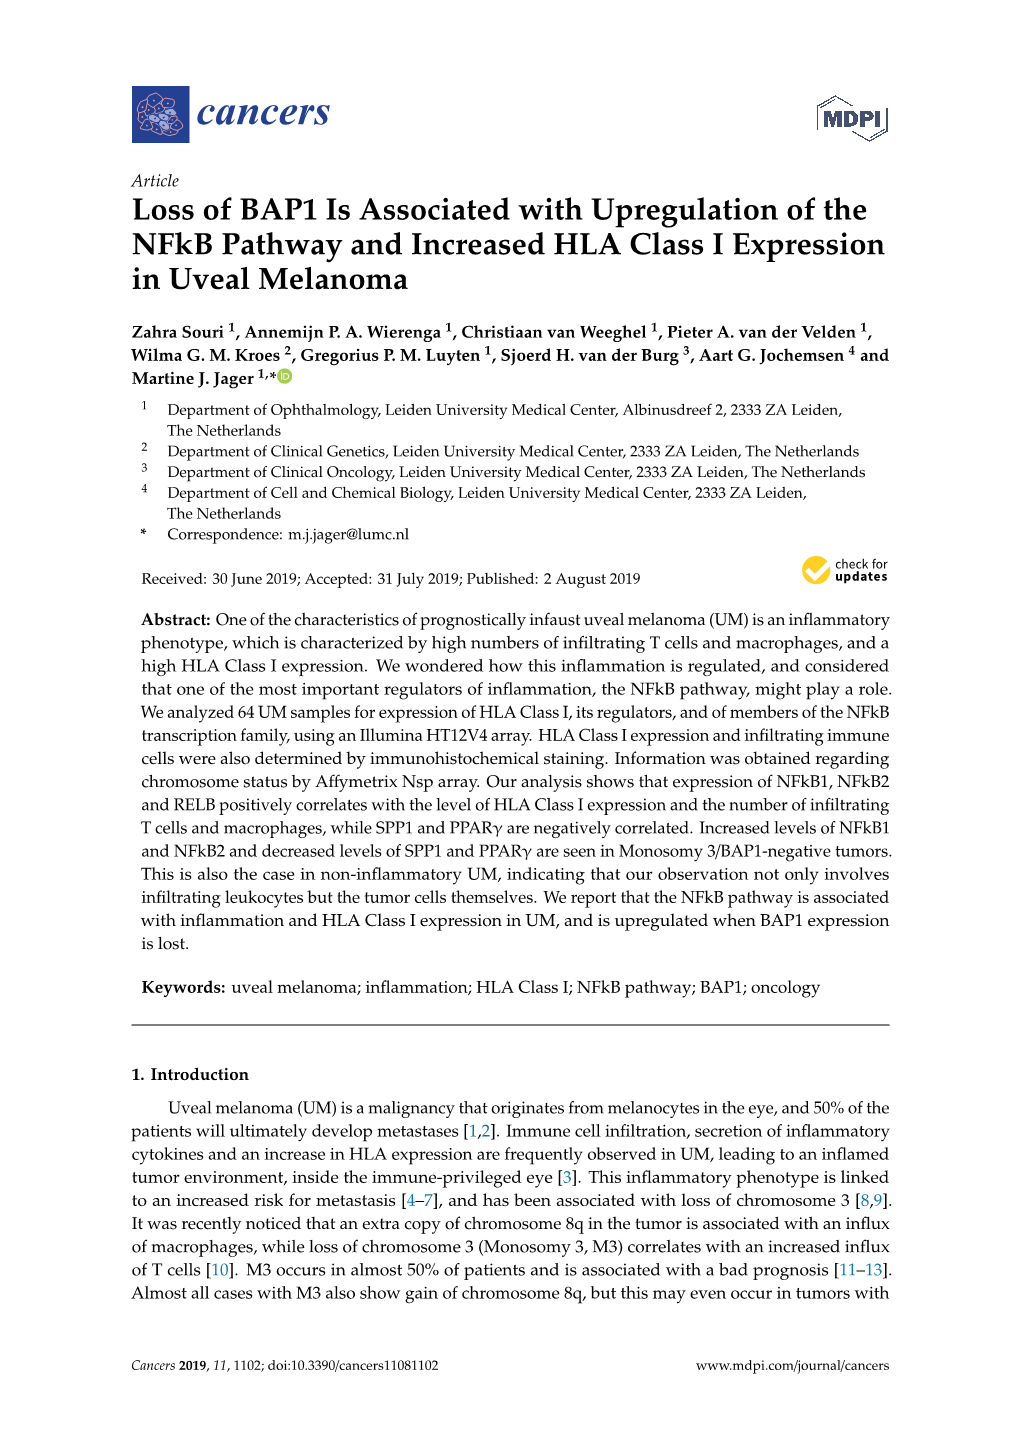 Loss of BAP1 Is Associated with Upregulation of the Nfkb Pathway and Increased HLA Class I Expression in Uveal Melanoma